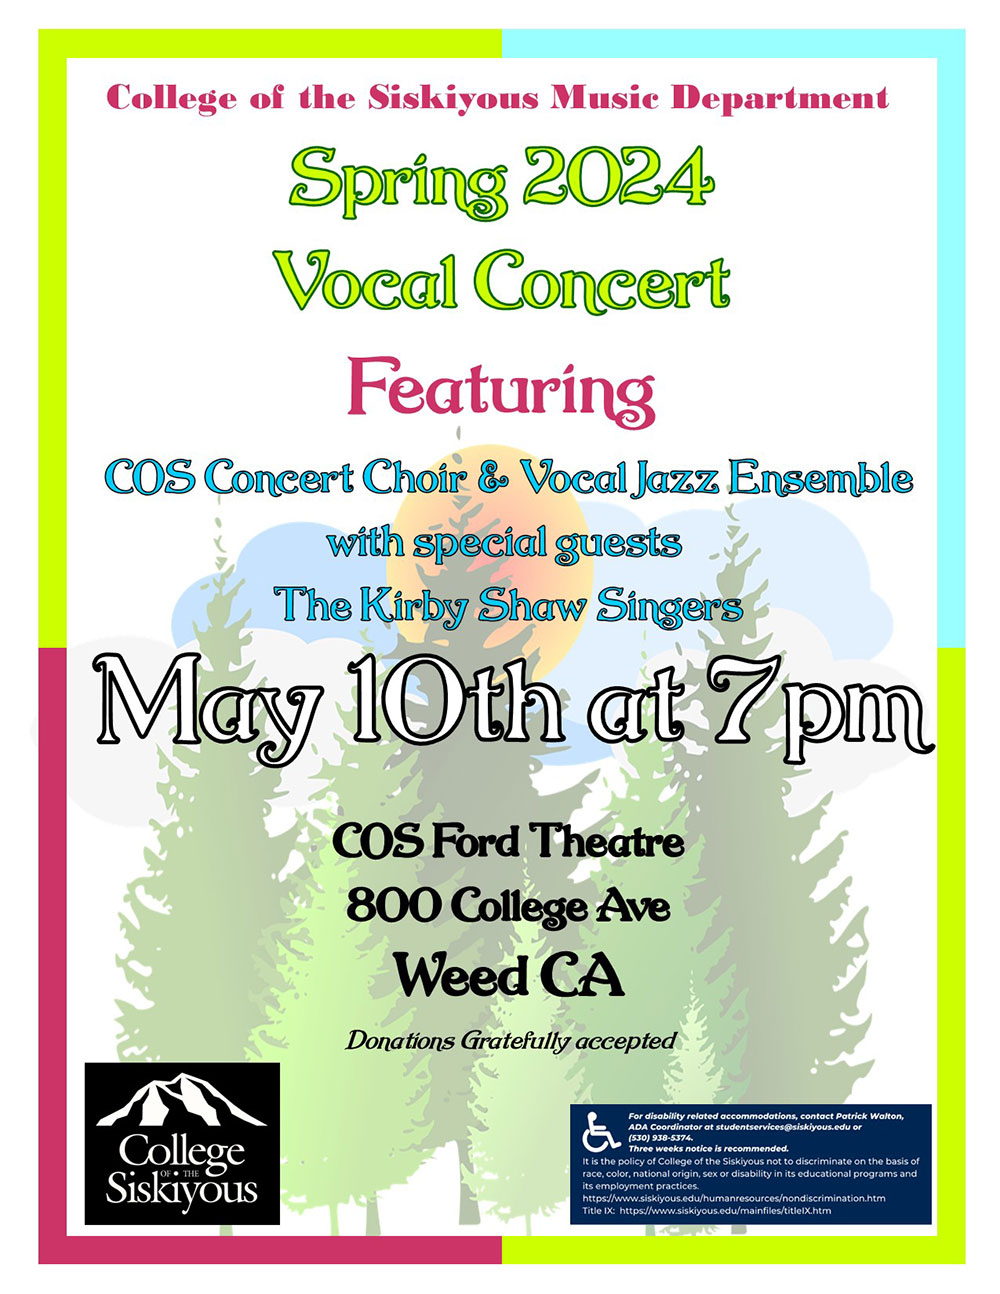 Spring 2024 Vocal Concert Featuring COS Concert Choir & Vocal Jazz Ensemble with special guests The Kirby Shaw Singers. May 10th at 7:00 pm. COS Ford Theatre. Donations gratefully accepted.